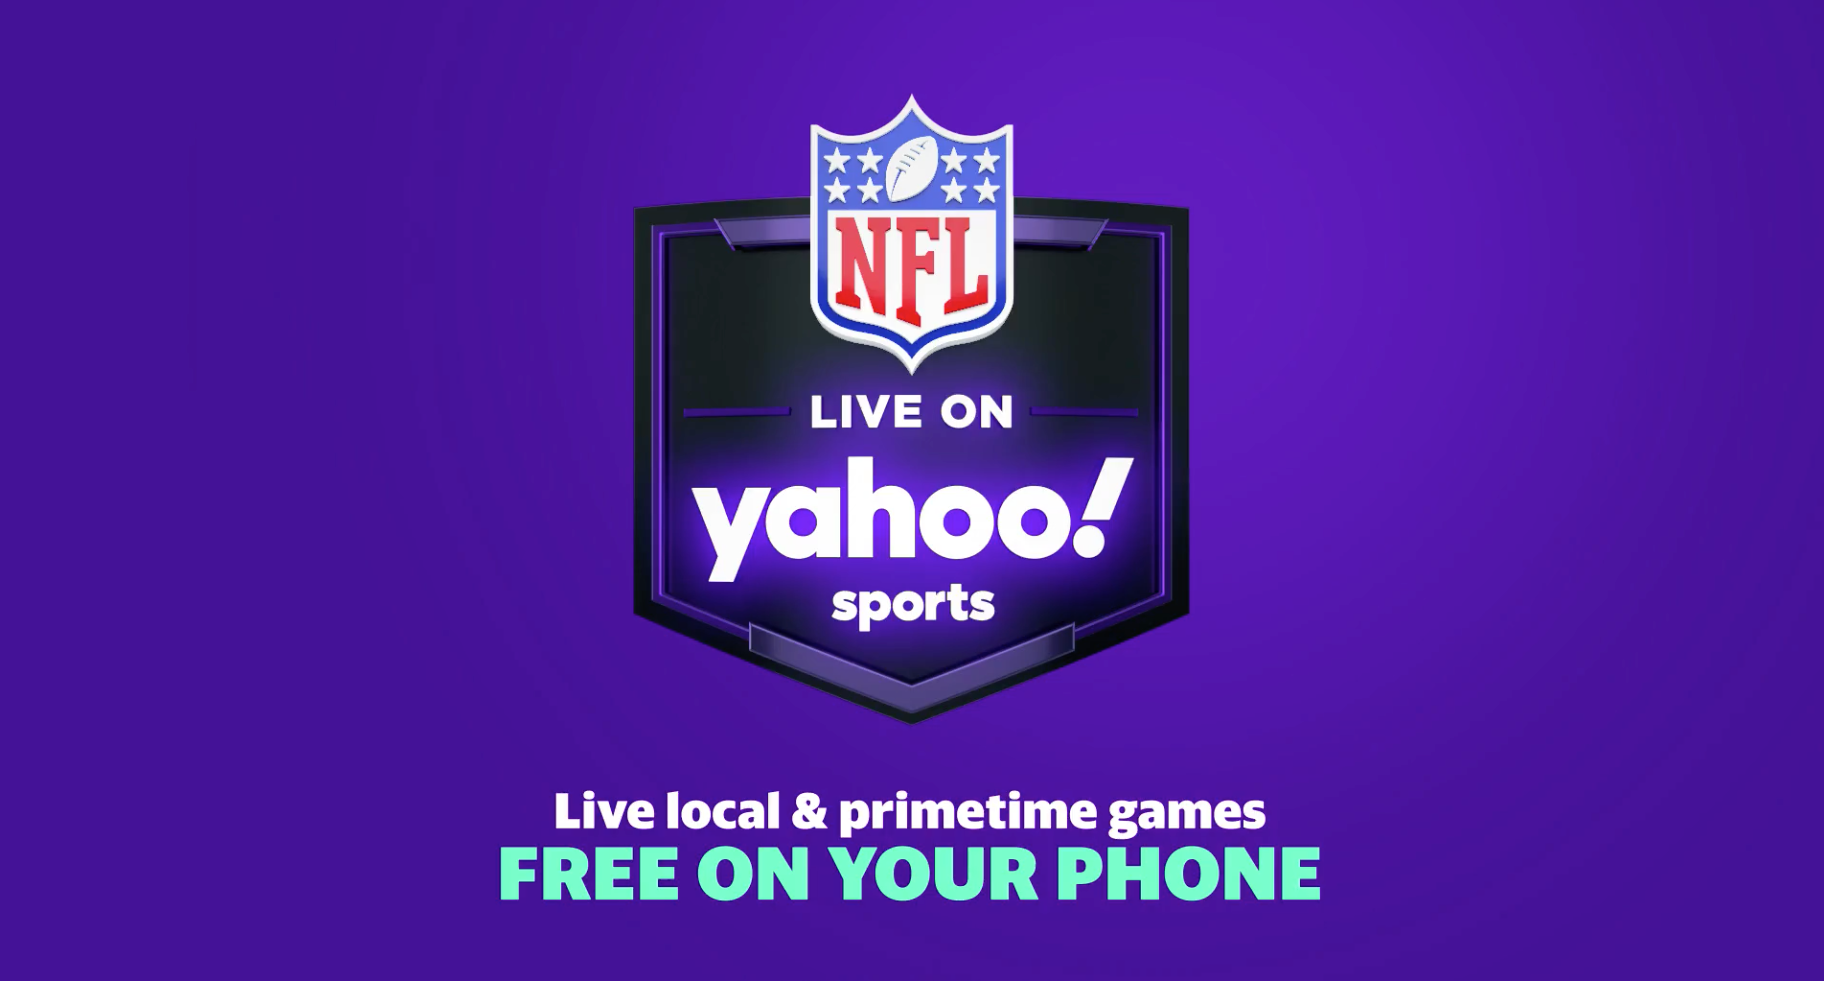 Espn Nbc Nab Nfl Mobile Streaming Games After Verizon Loses Exclusive Rights Game Streaming Monday Night Football Espn